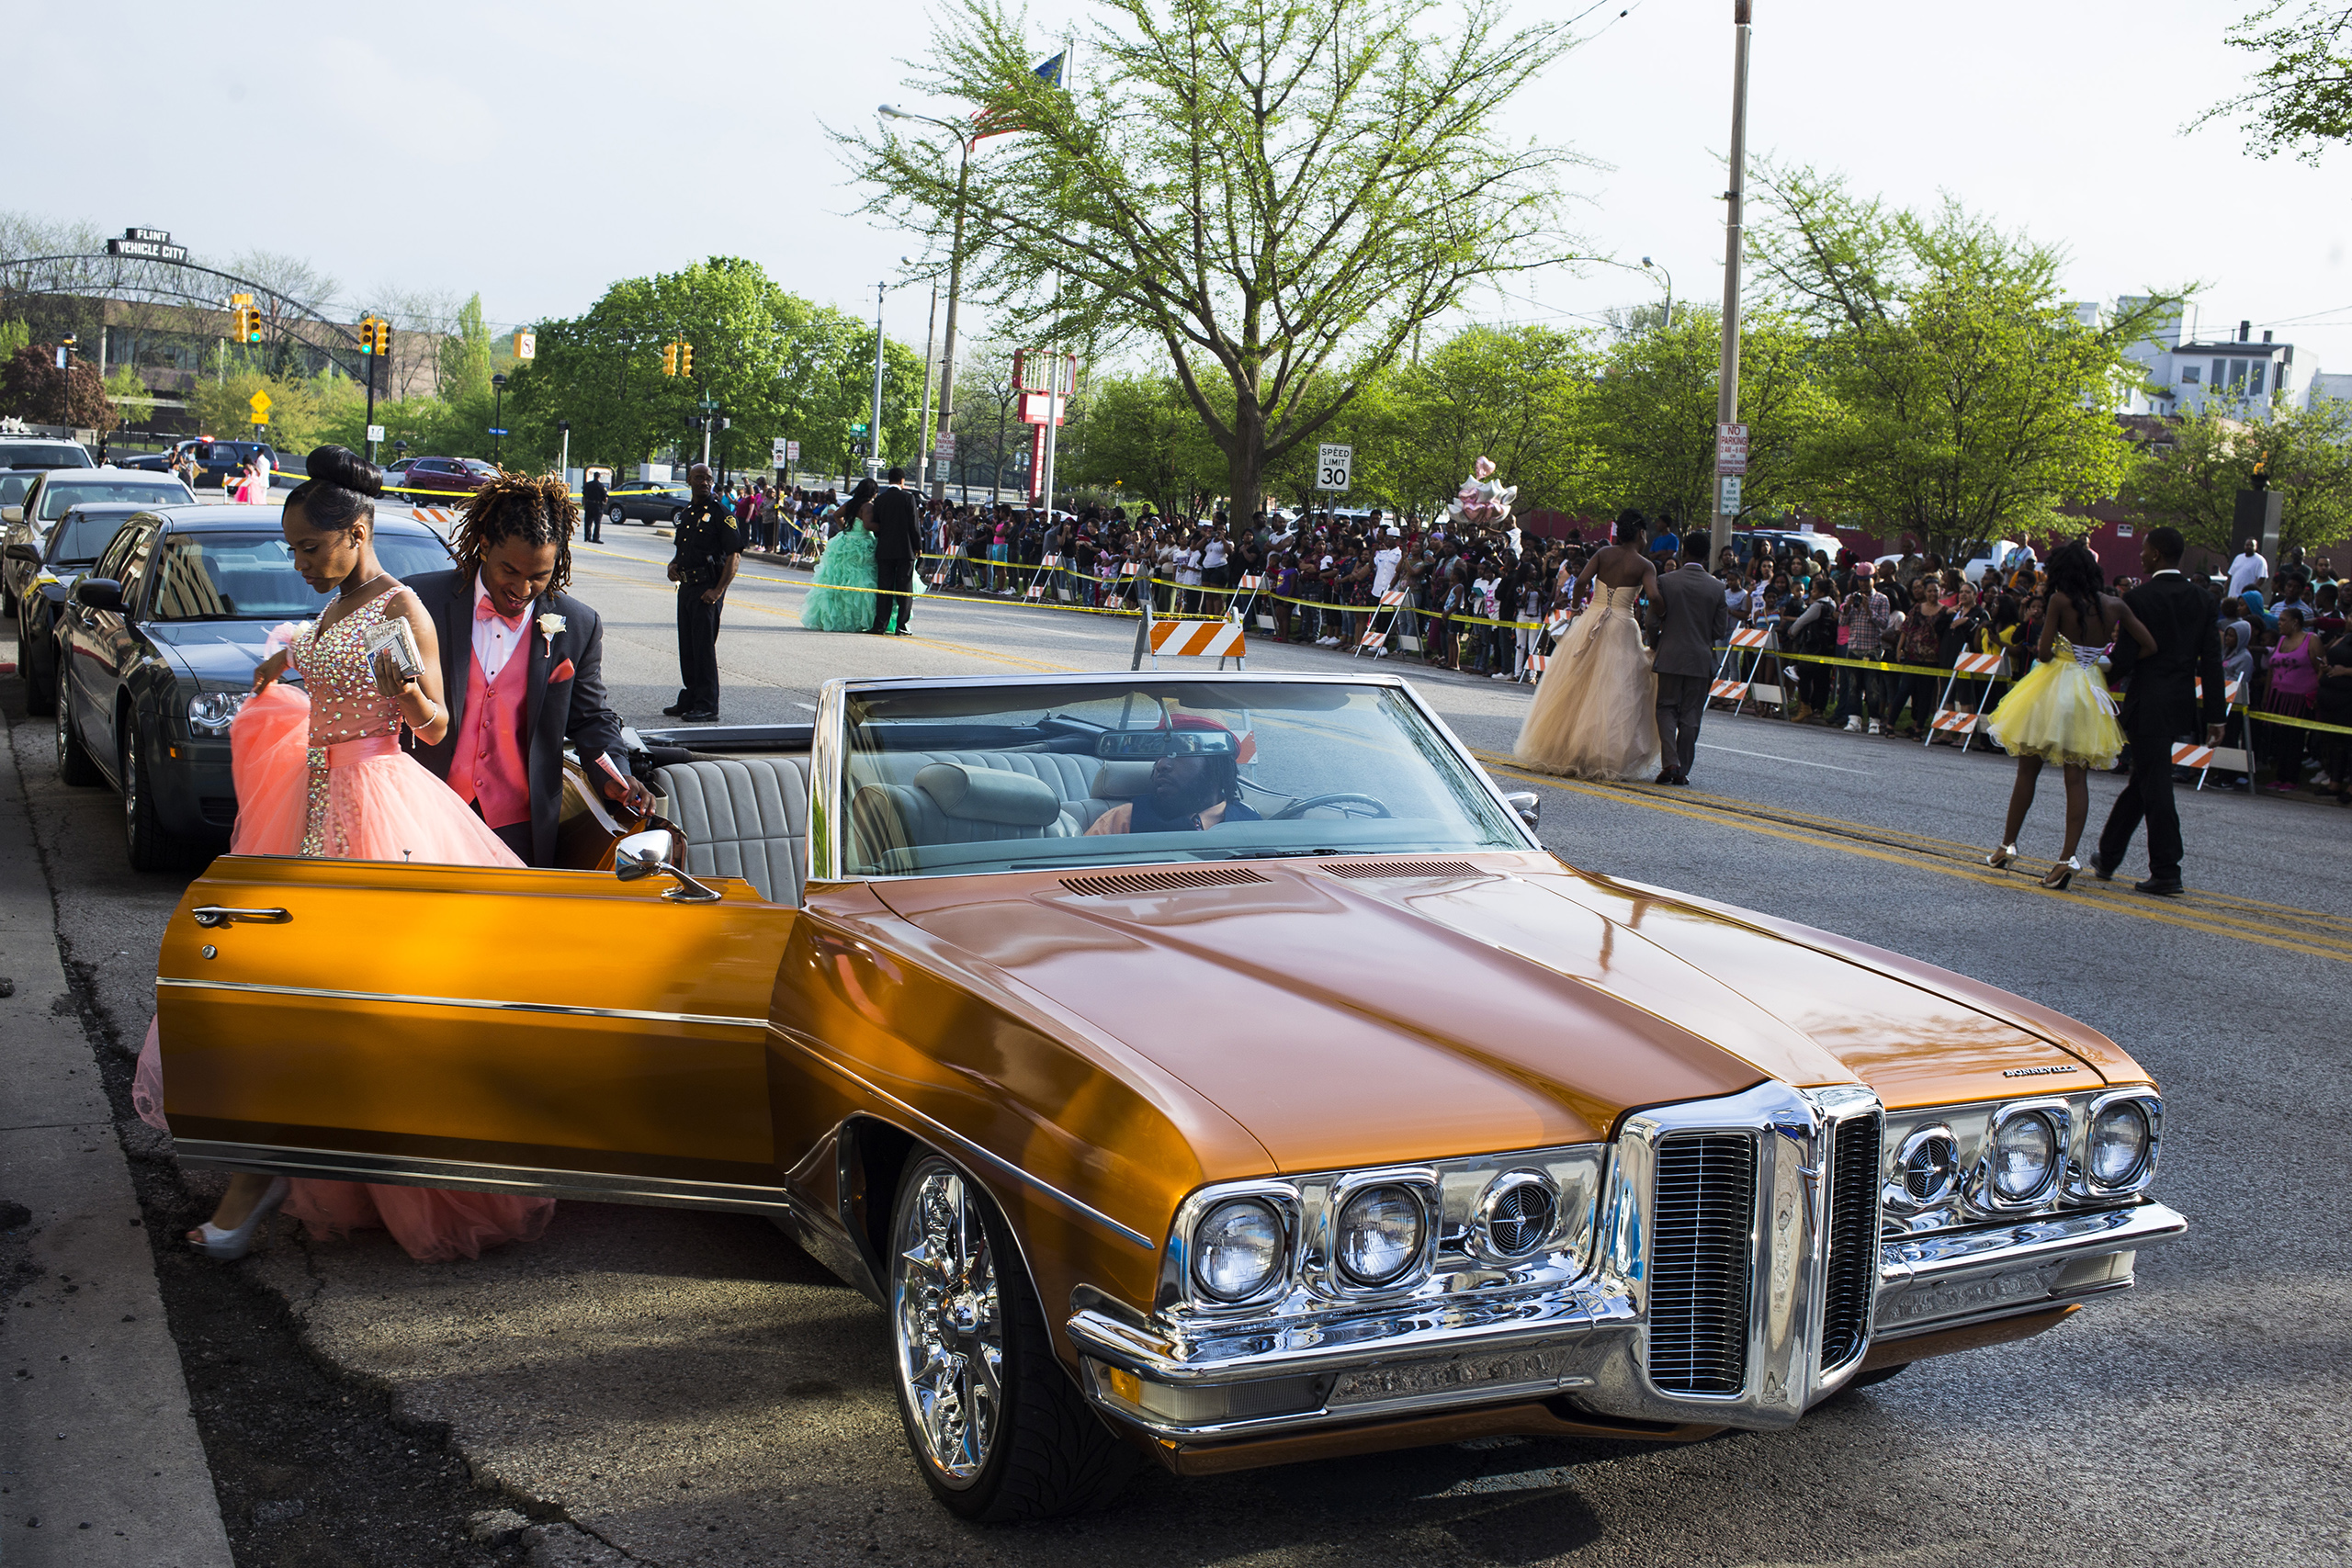 Flint Southwestern Classical Academy senior Reyna Deloney exits a car along with her date, Johnanthony Fulgham, while getting dropped off at their prom in downtown Flint, May 2015. Members of the community lined the closed-down street to cheer and take pictures.